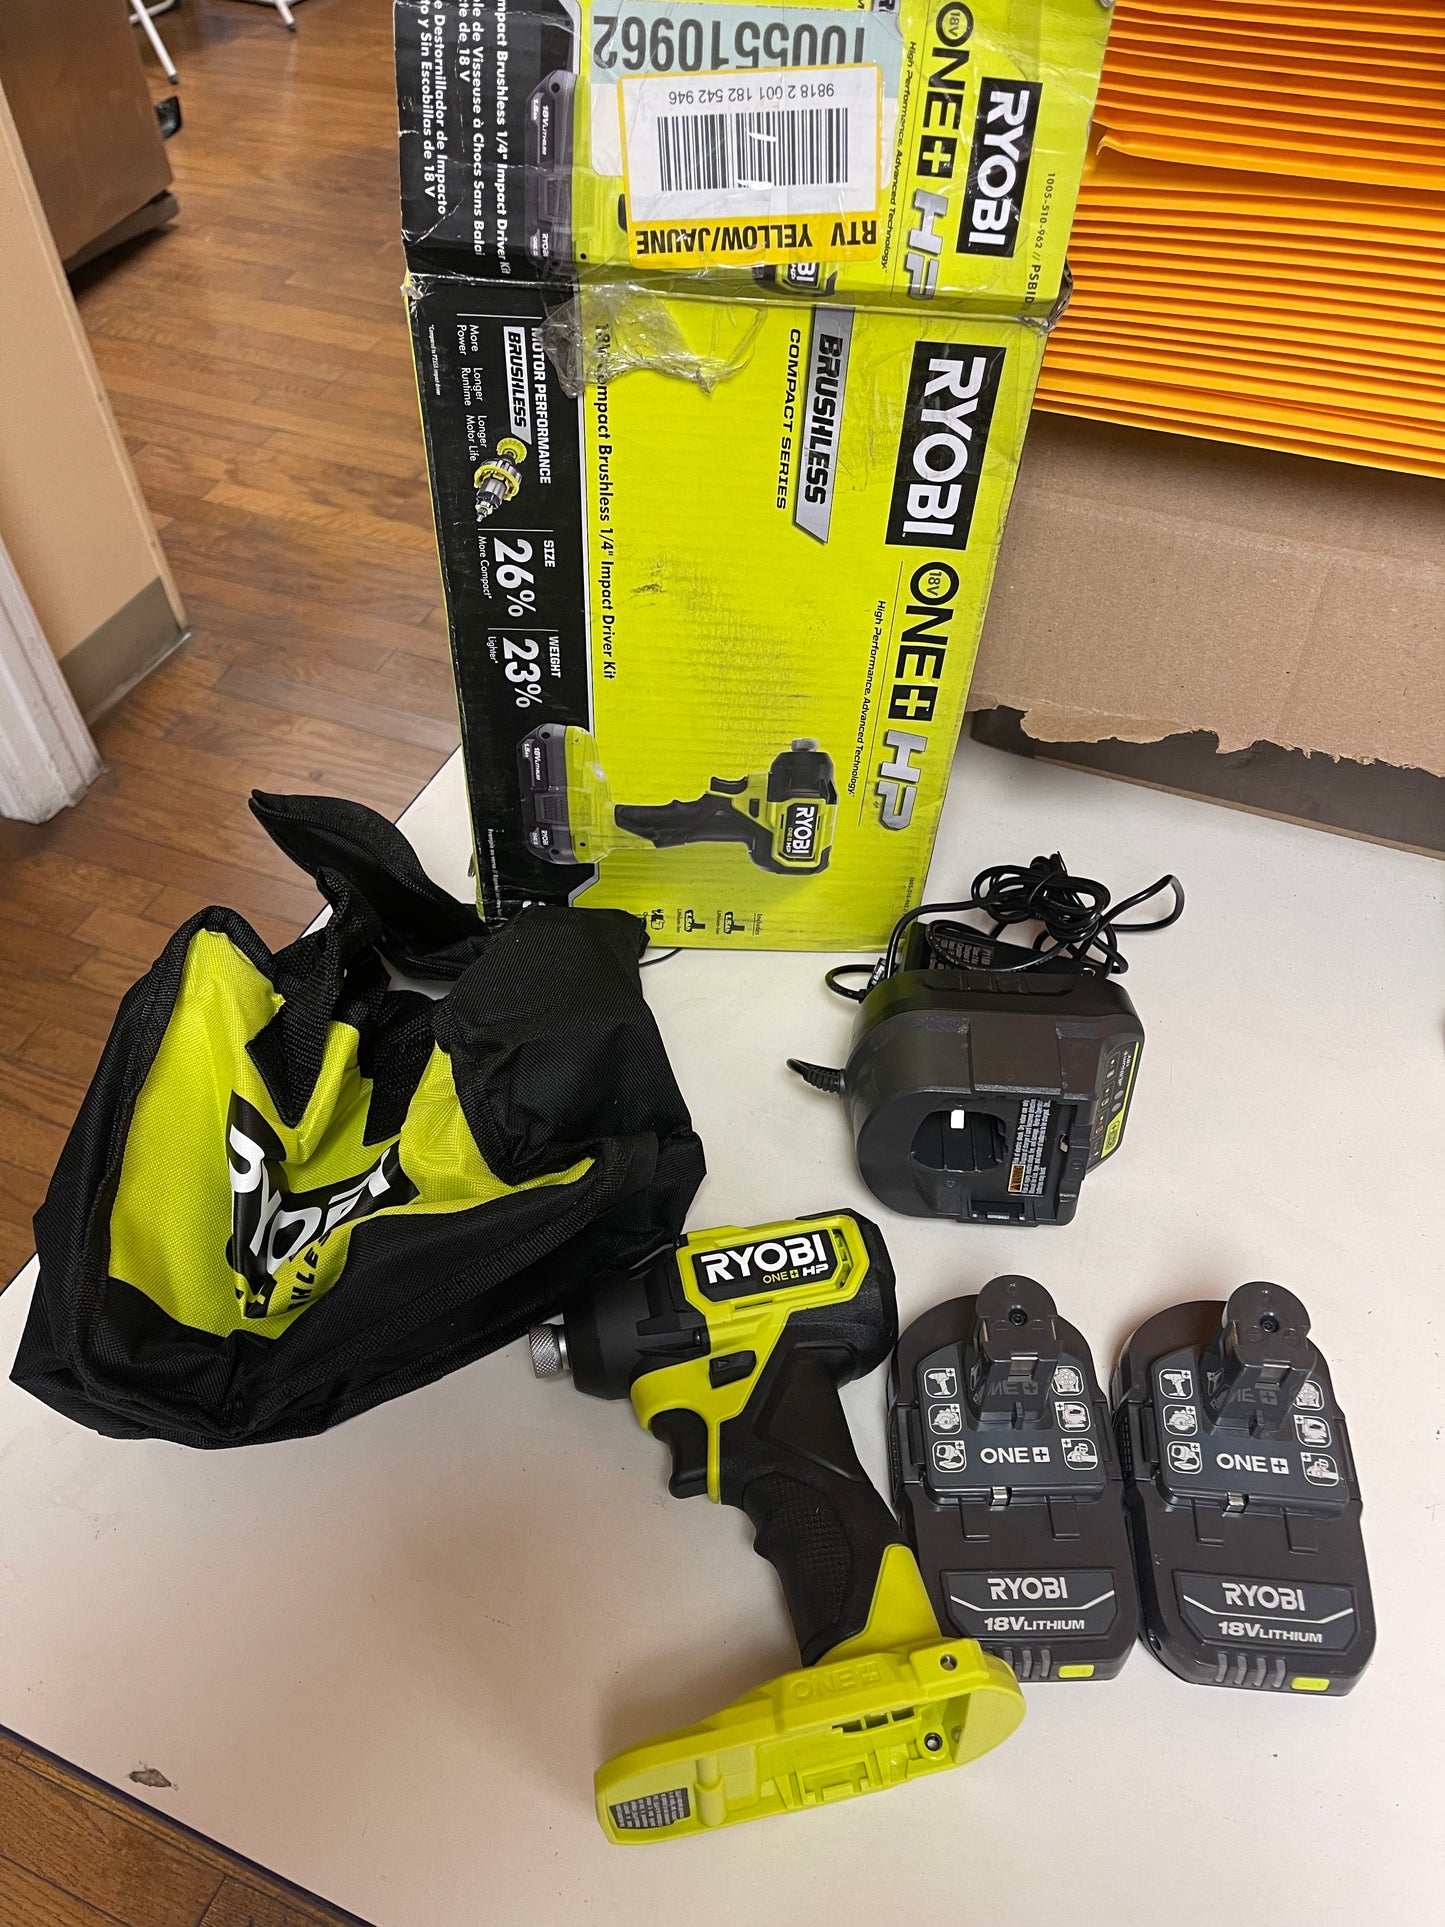 Ryobi One Plus HP 18V Brushless Cordless Compact 1/4in Impact Driver Kit With 2 1.5 Ah Batteries Charger And Bag Damaged Box